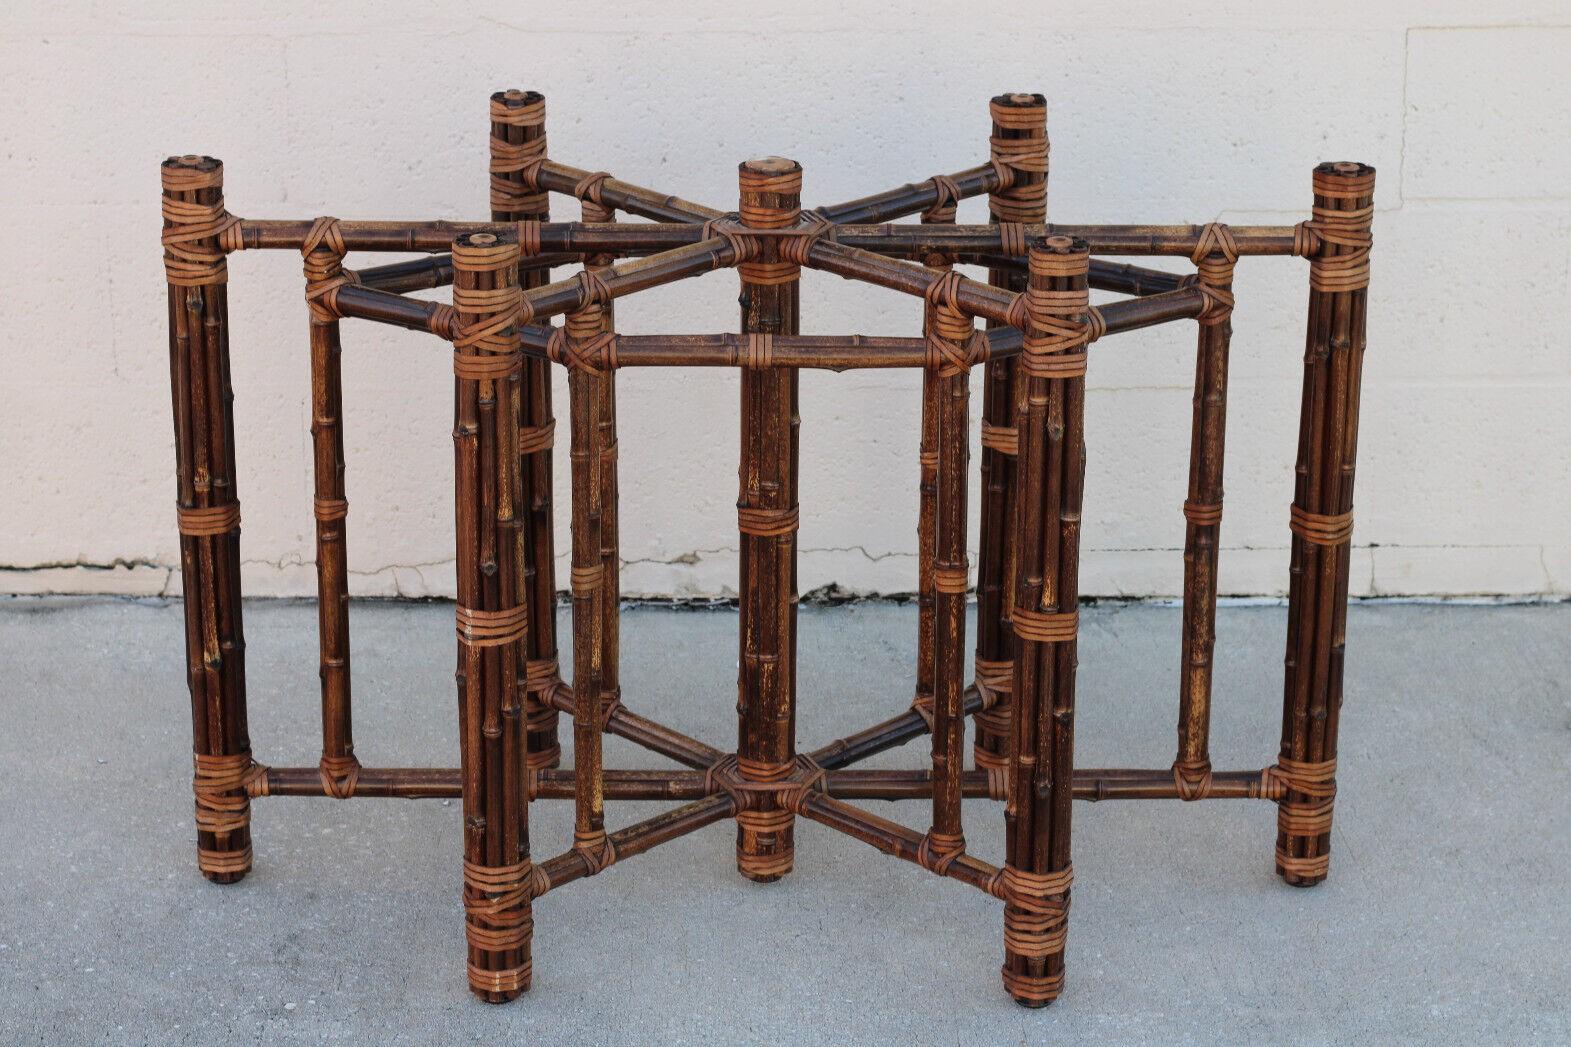 A natural brownish-black bamboo dining table base with six legs designed by John McGuire. This beautiful and rare circa 1970s table base, crafted entirely by hand, is constructed of iron pipe, bamboo, and rawhide. Bamboo lengths have been carefully